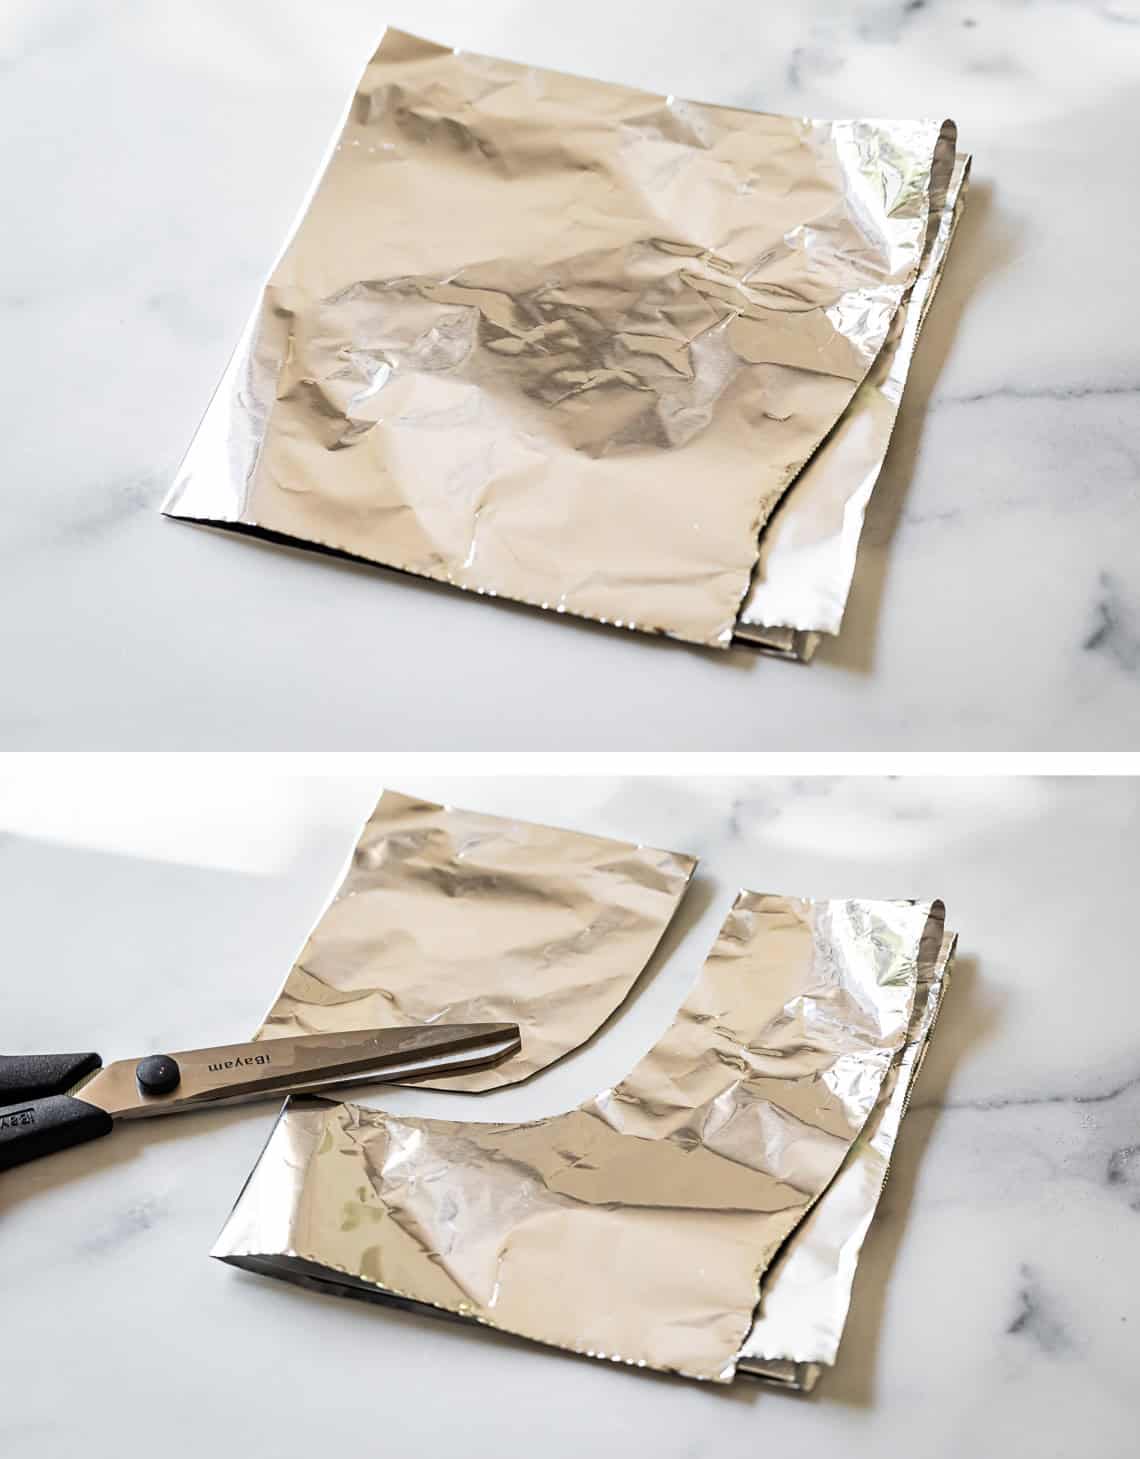 top pic: square foil piece folded twice into quarters, bottom scissors cutting center circle out.